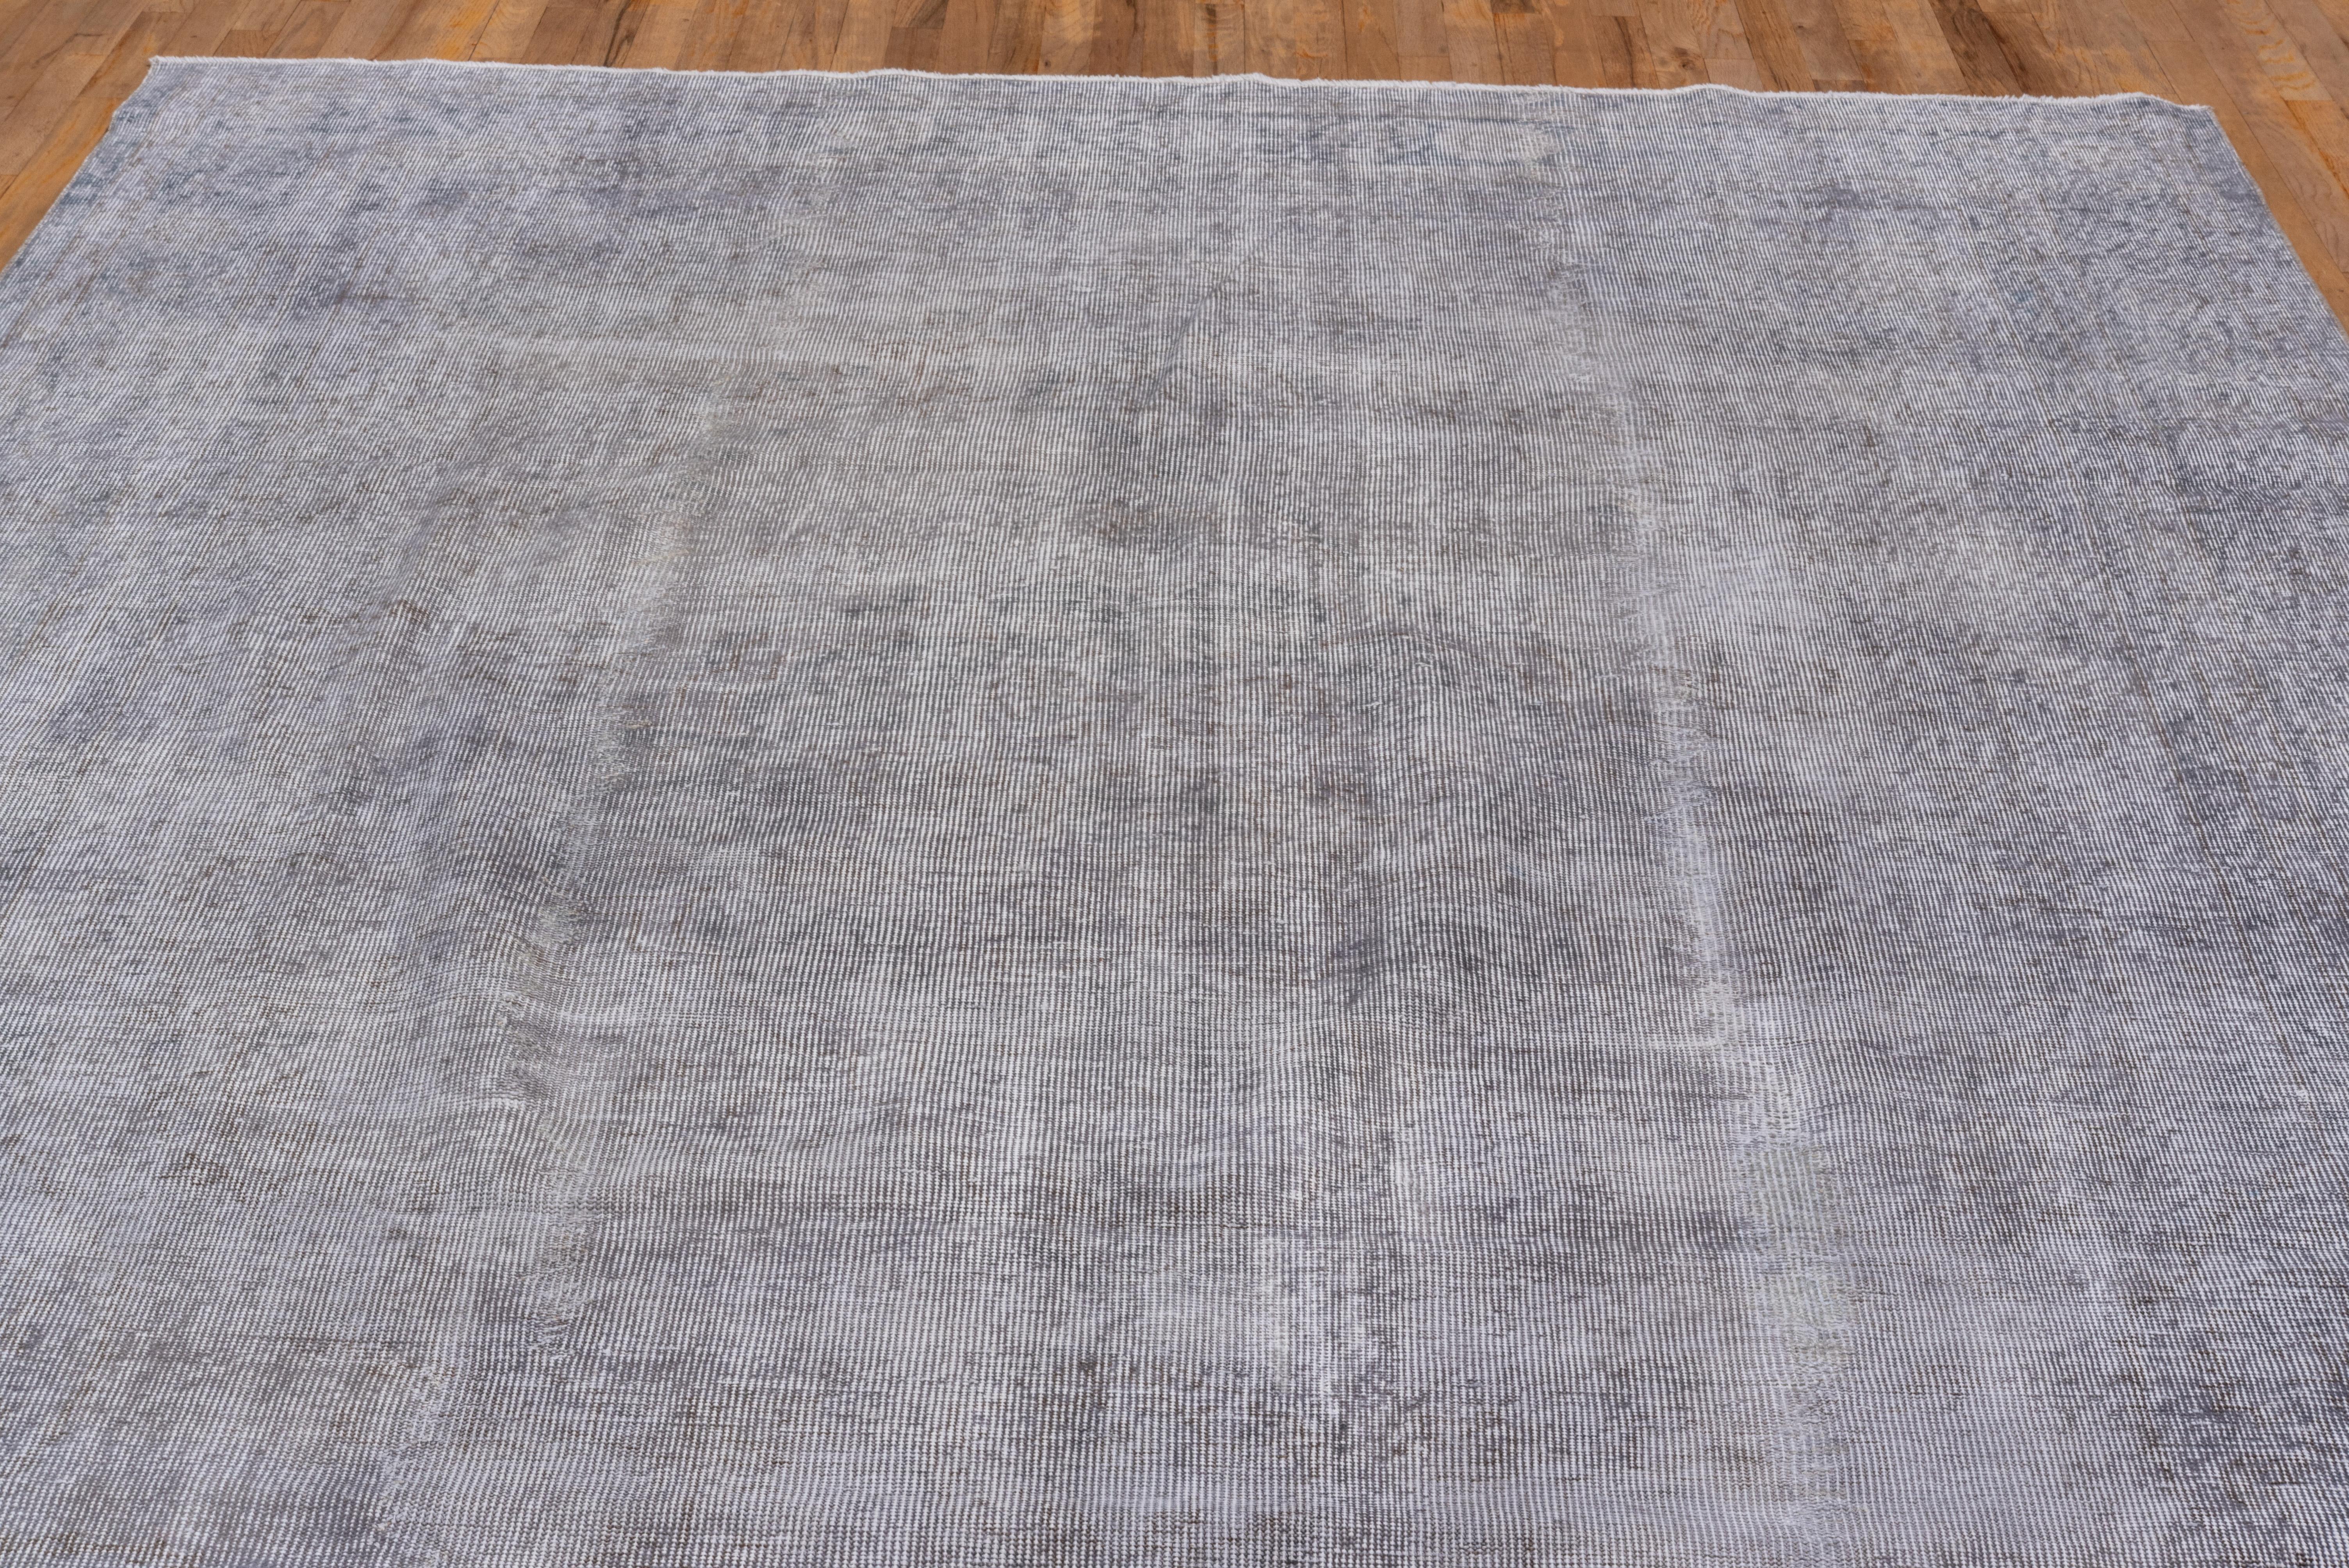 Hand-Knotted Vintage Light Gray Overdyed Sparta Rug, Shabby Chic